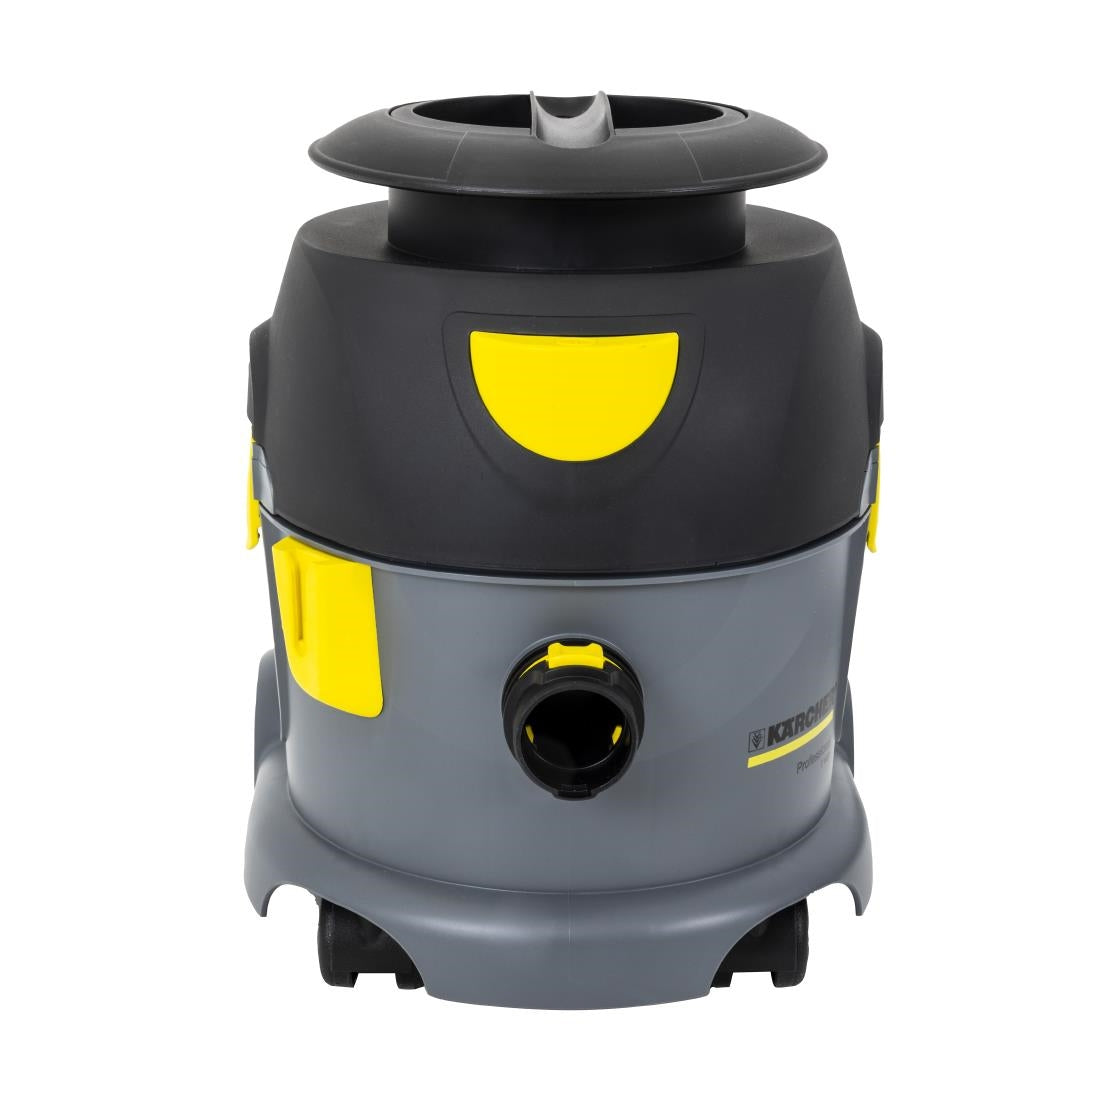 Karcher Pro Dry Vacuum Cleaner T10 JD Catering Equipment Solutions Ltd